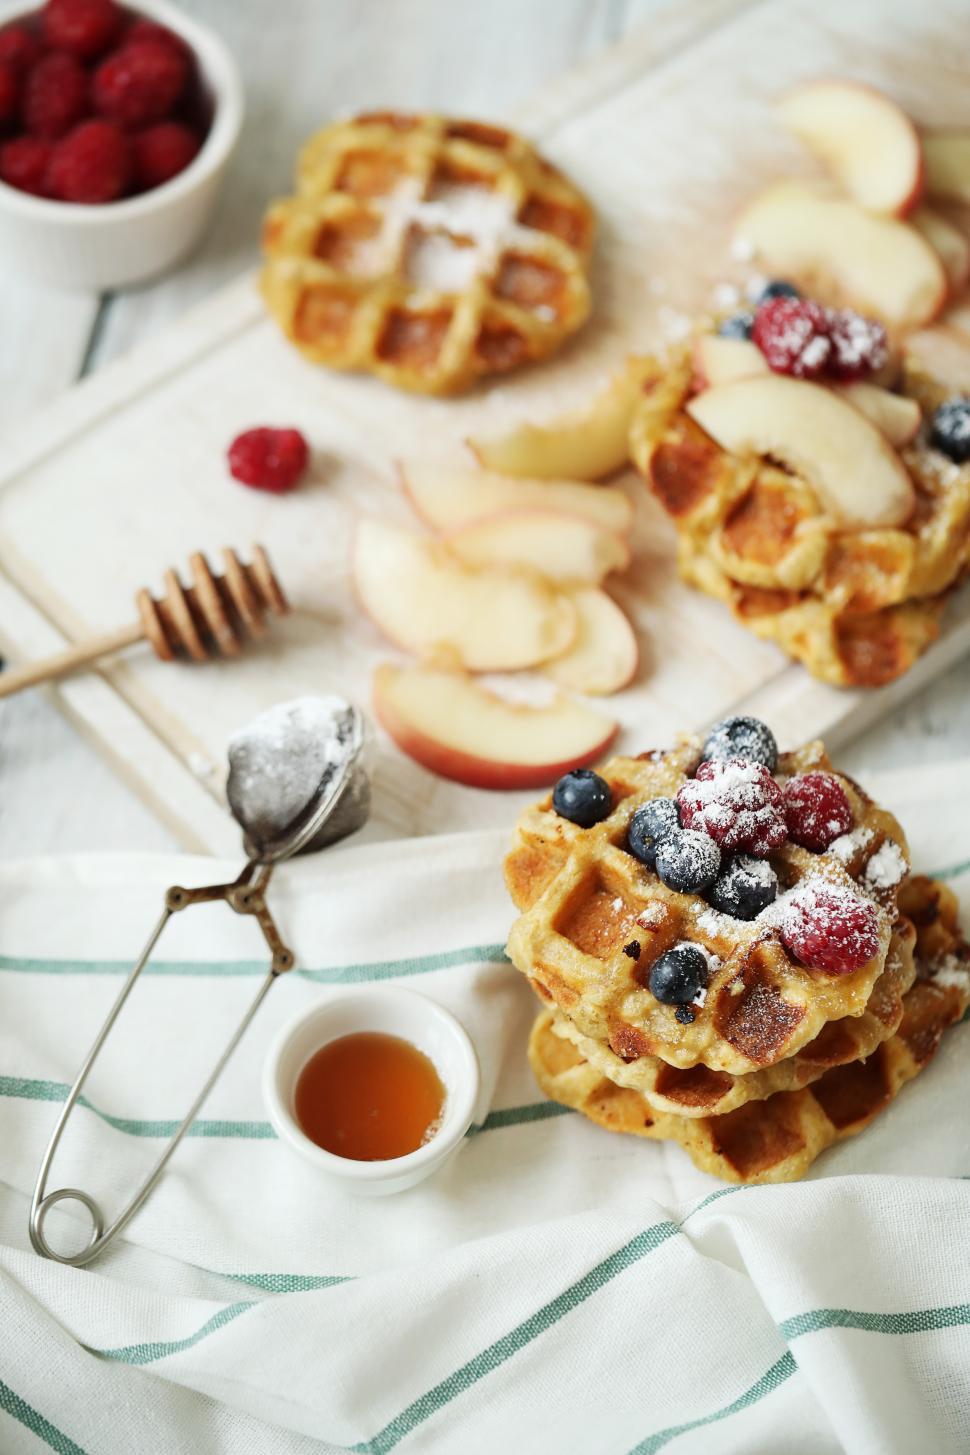 Free Image of Waffles with fruit and powdered sugar 